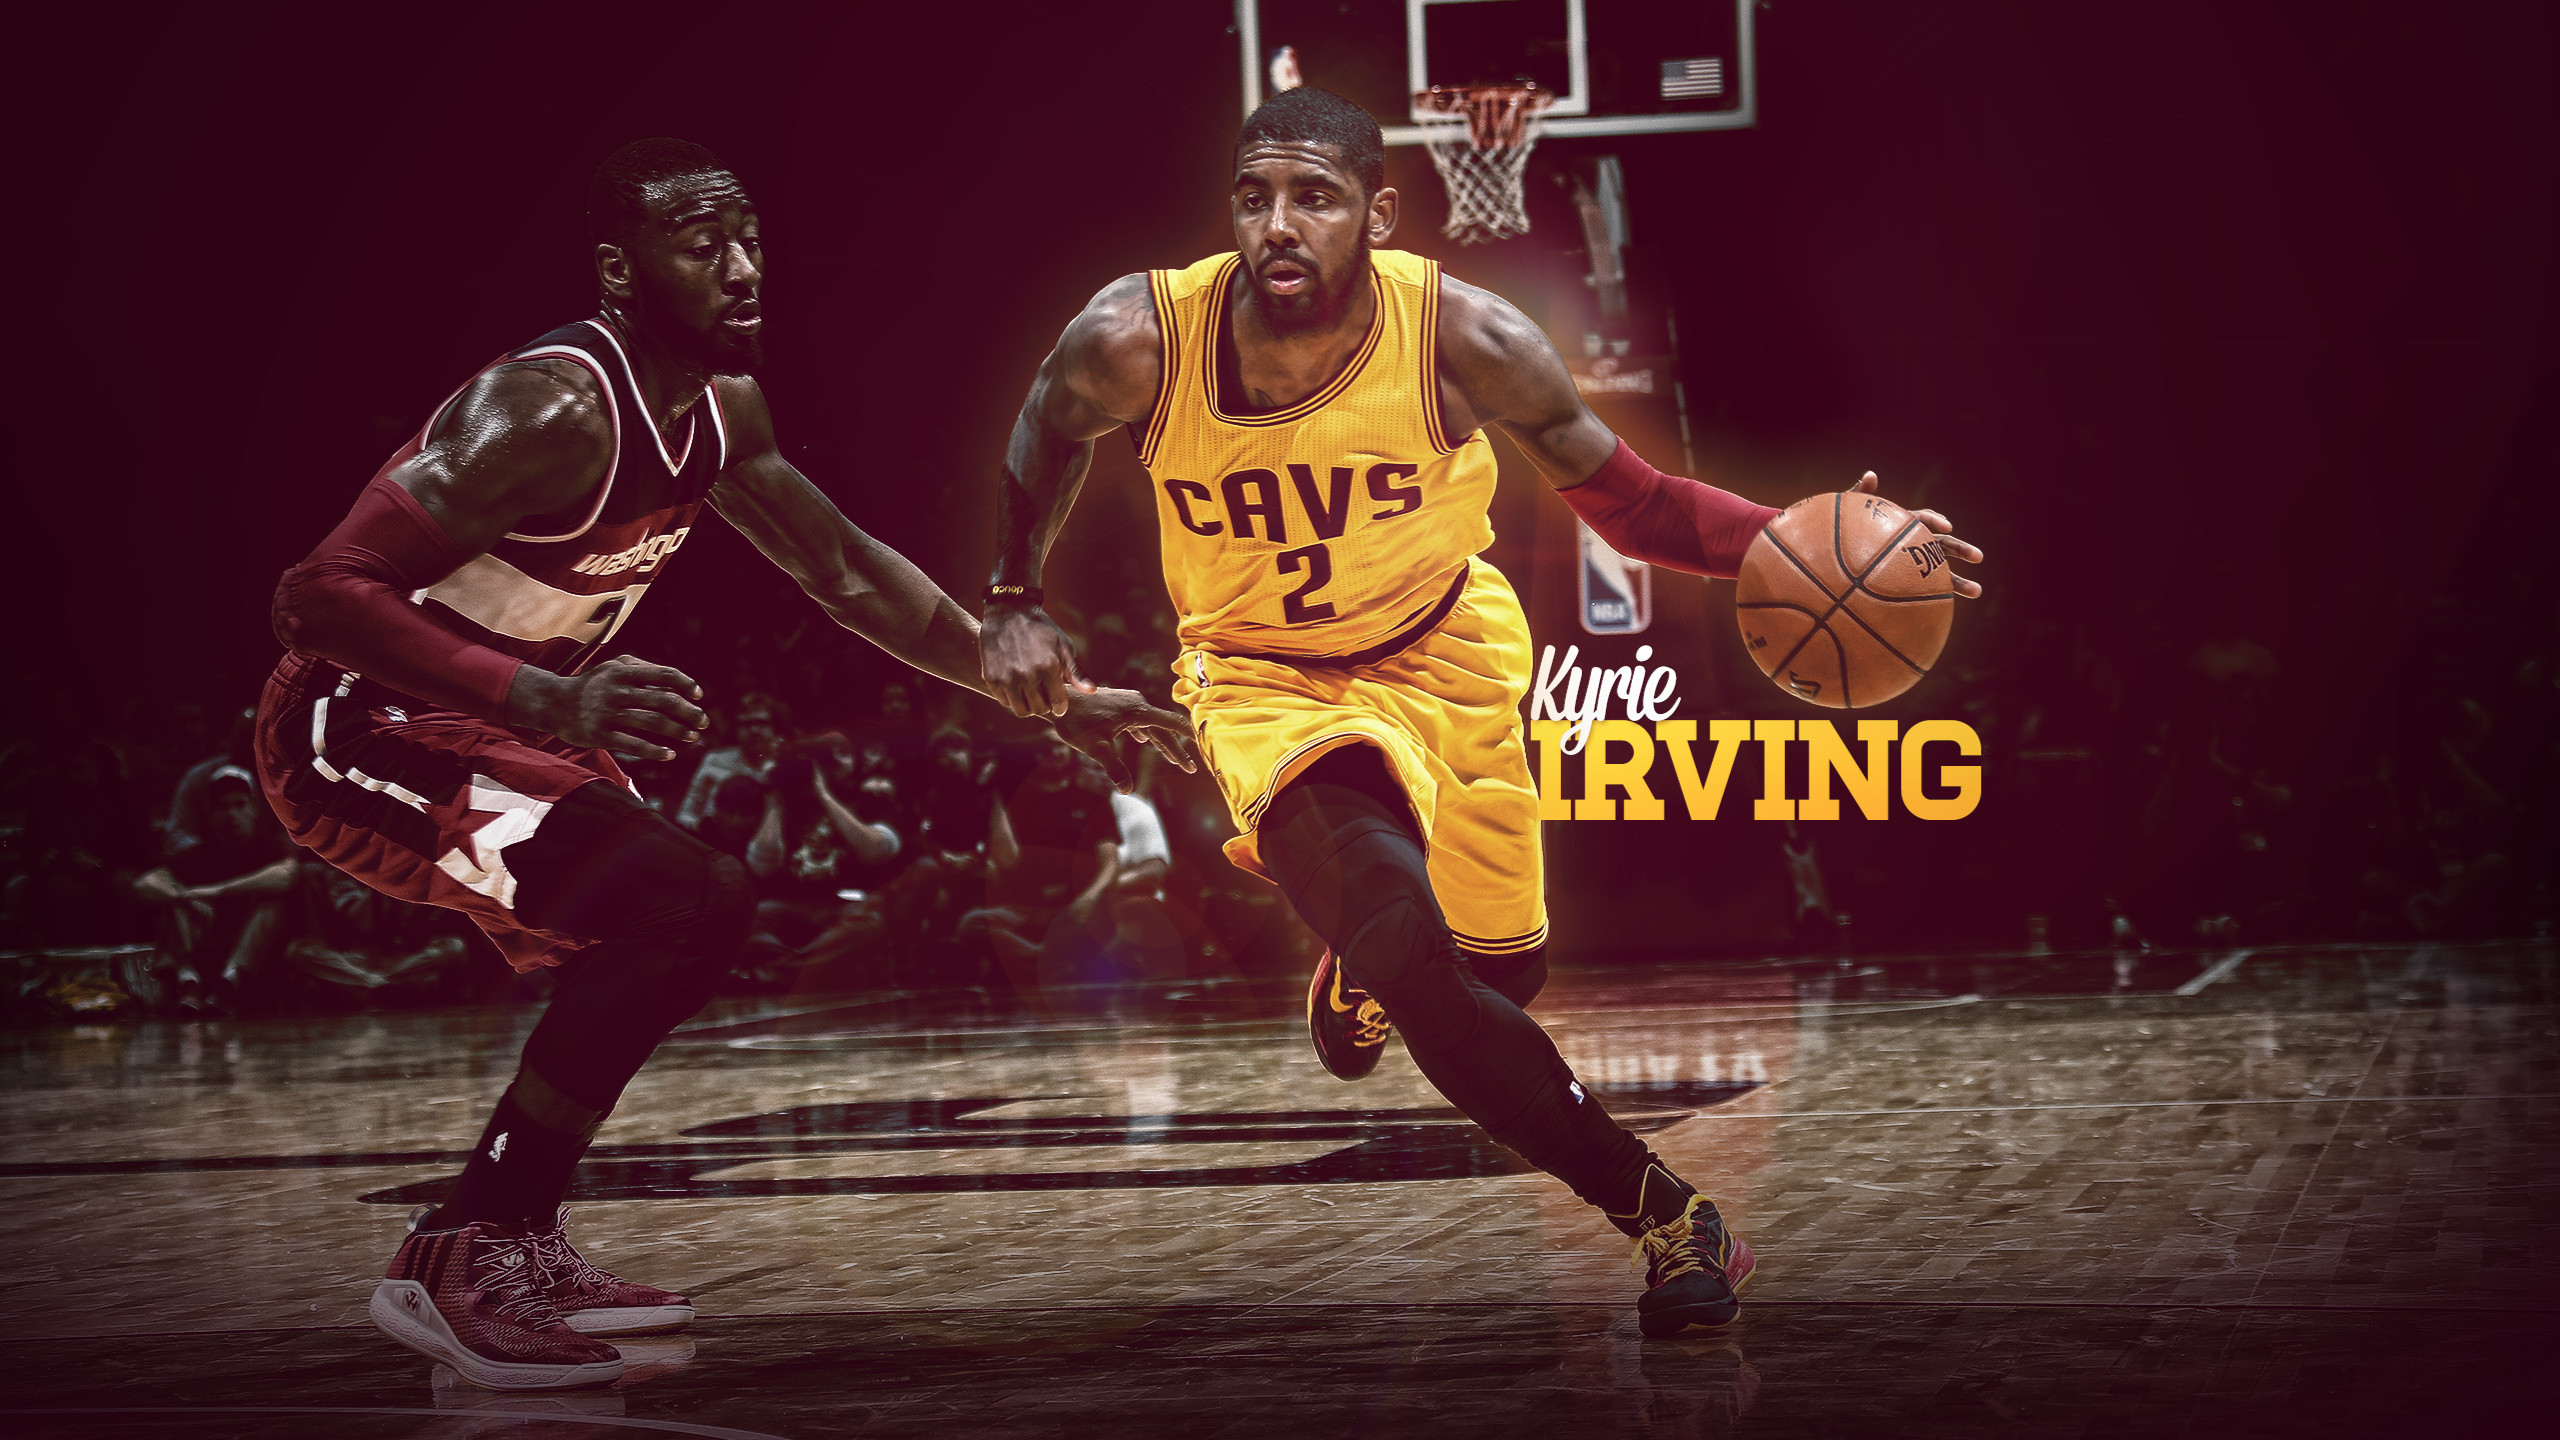 stephen curry and kyrie irving wallpaper